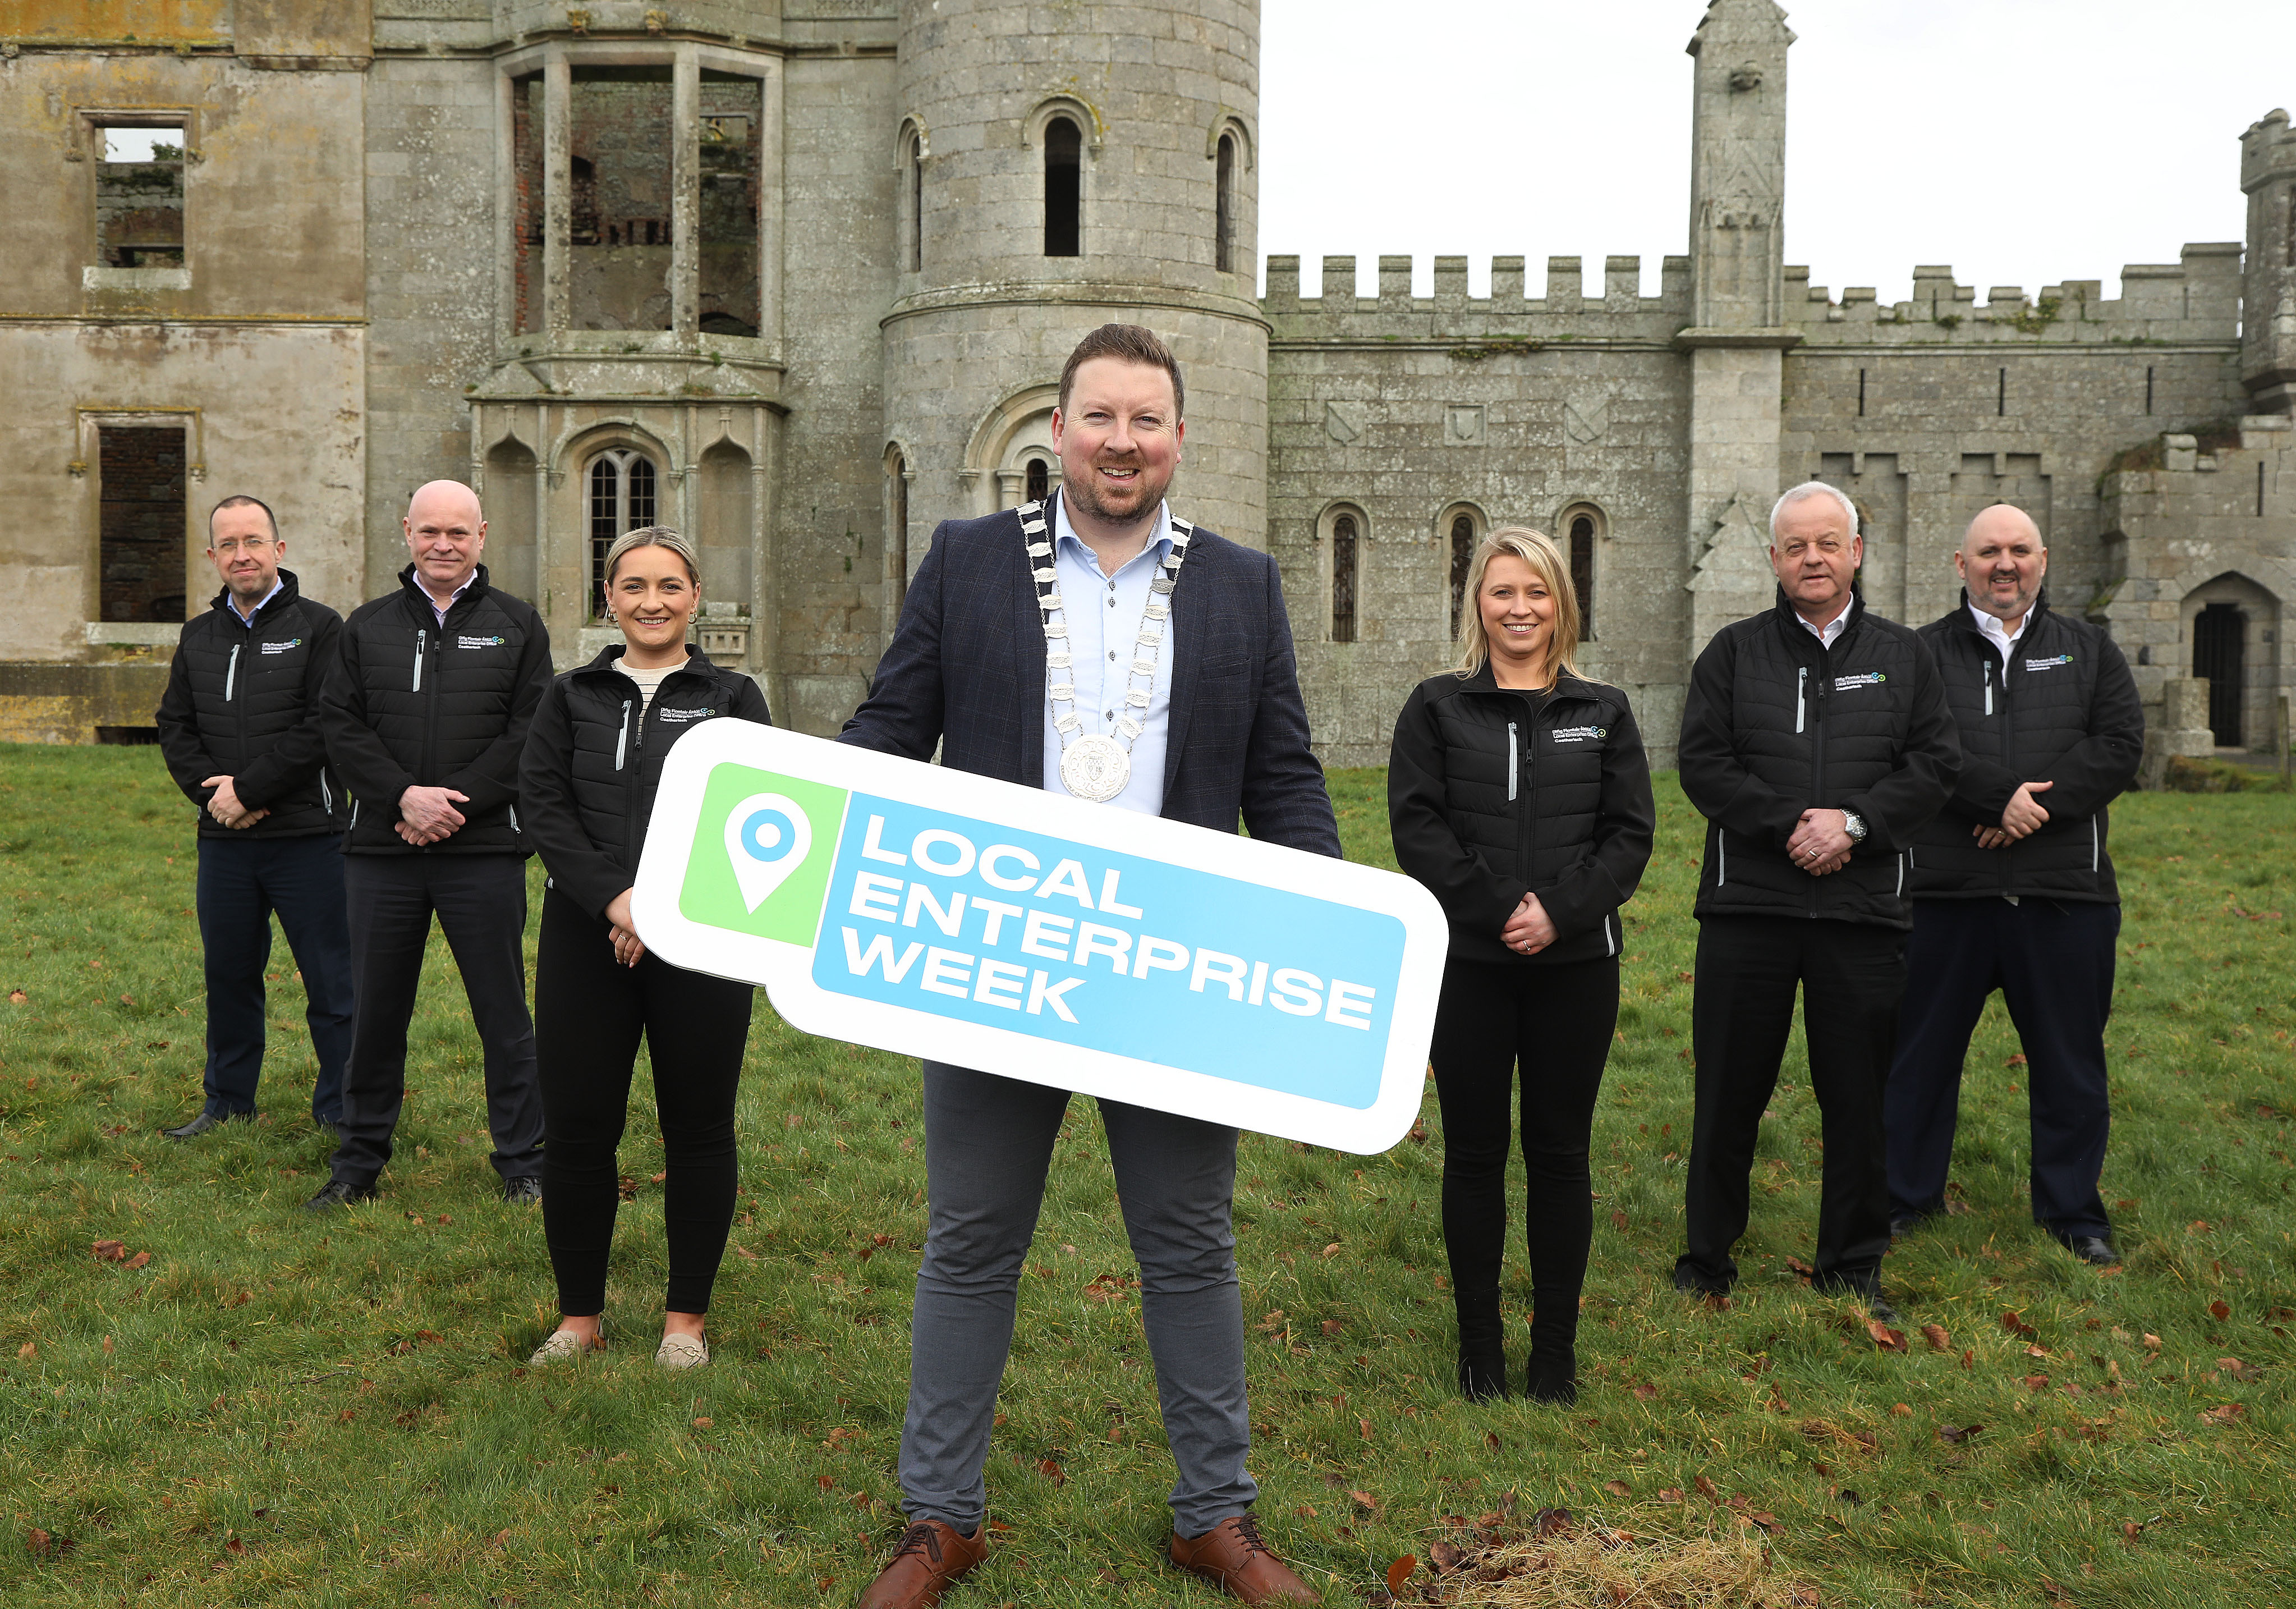 SIX EVENTS ANNOUNCED FOR CARLOW’S LOCAL ENTERPRISE WEEK 2023